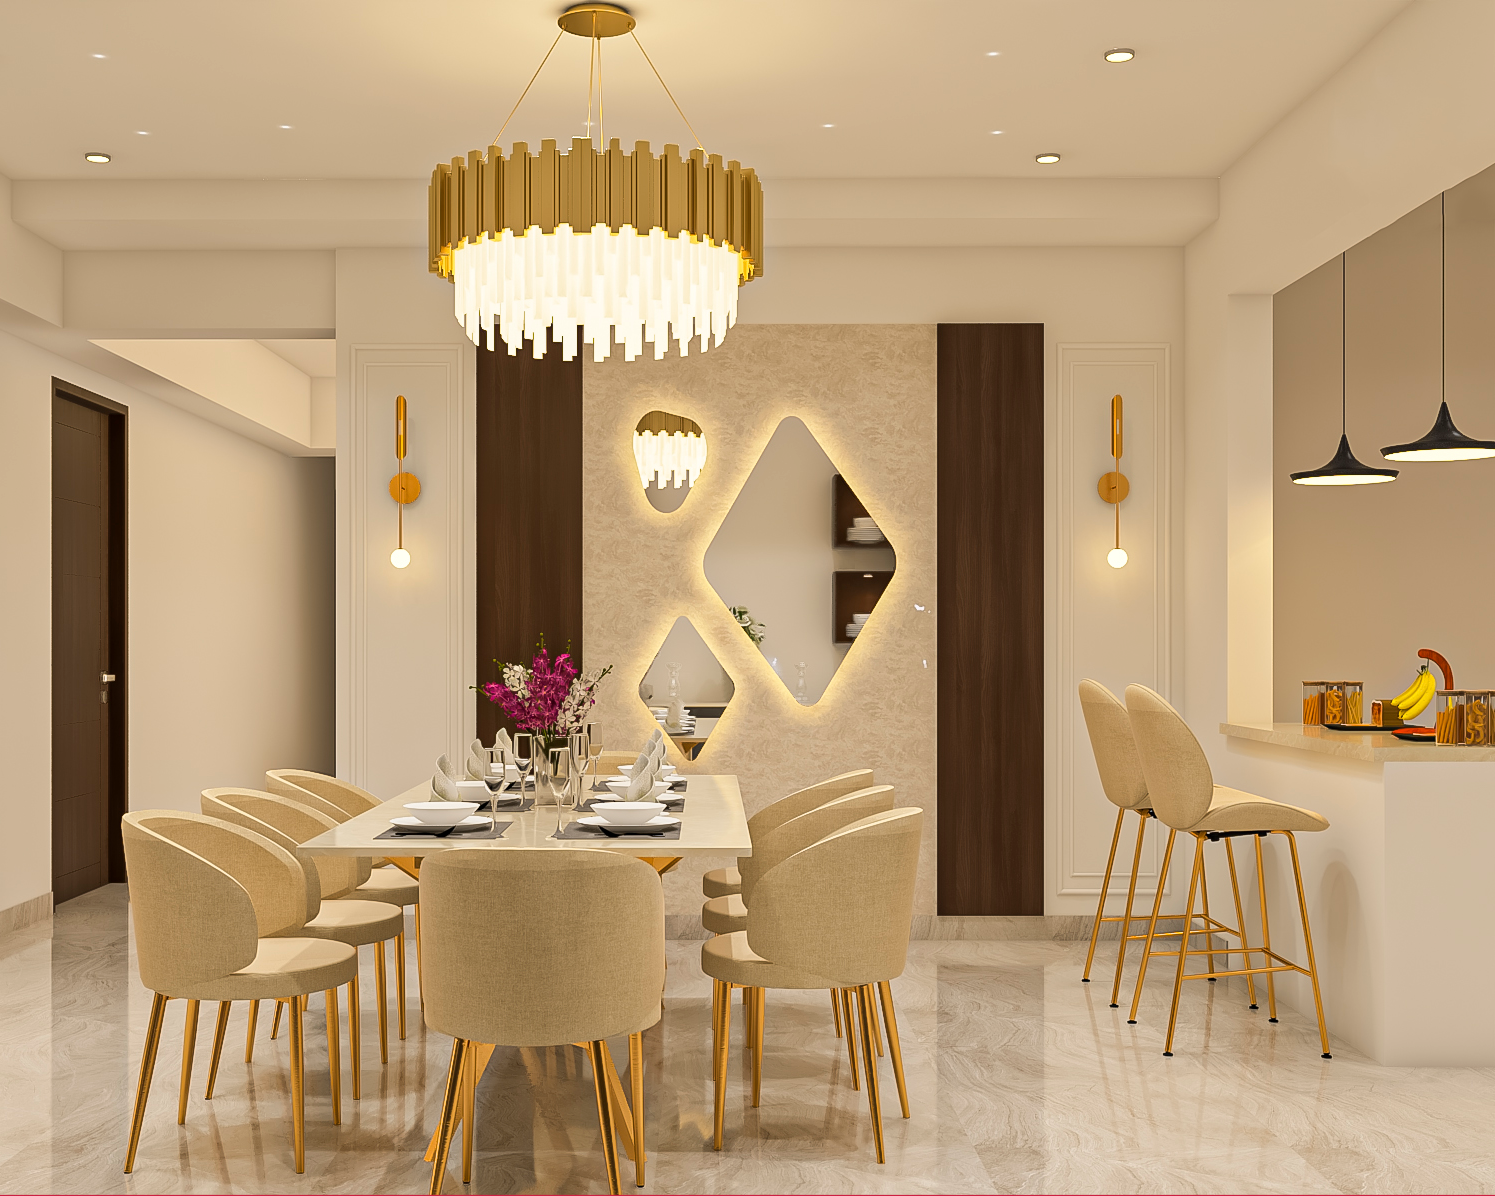 Classic Dining Room Design With Chandelier